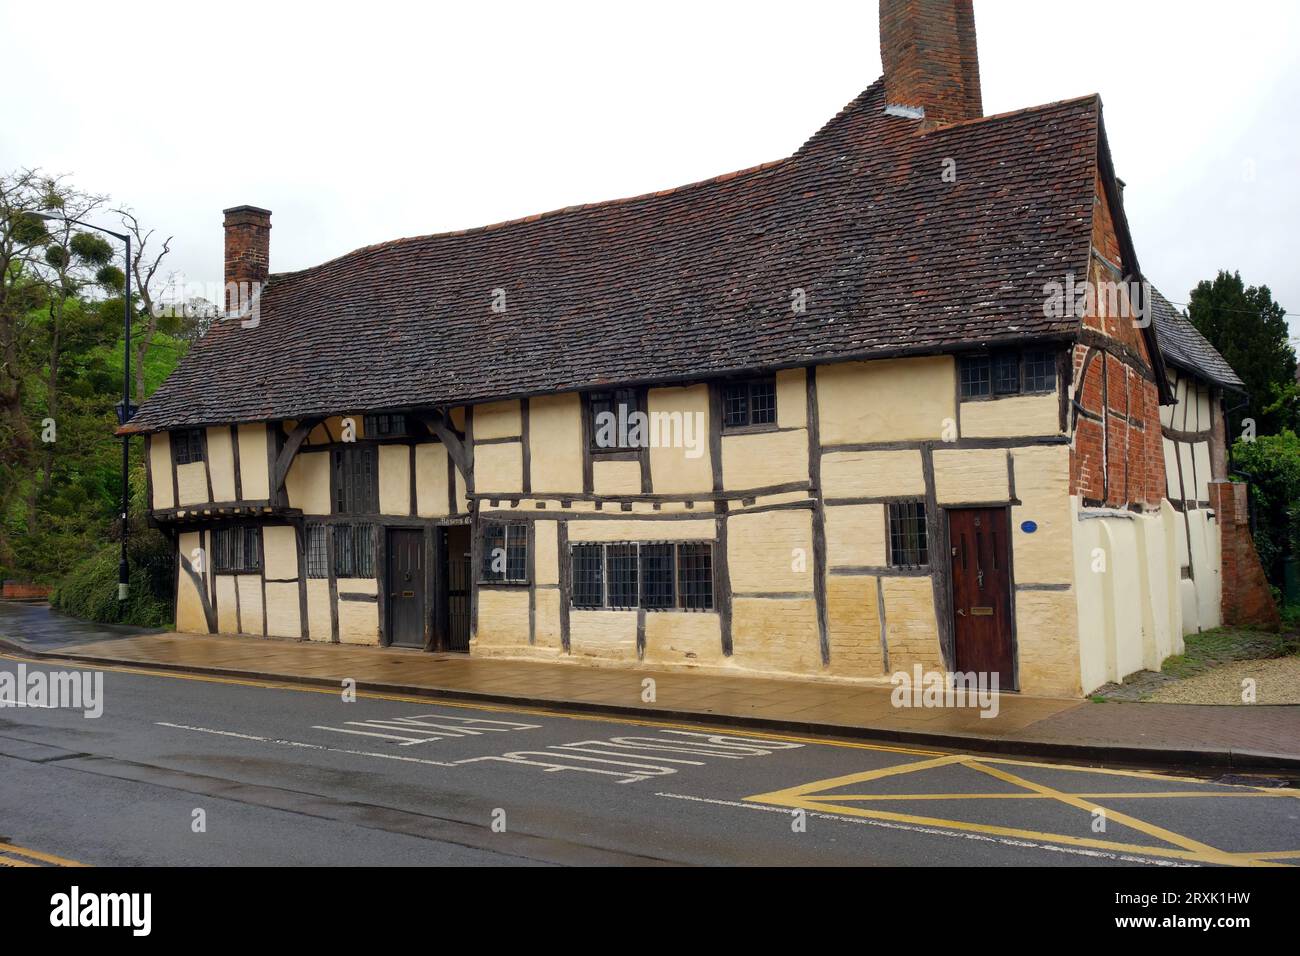 Masons Court a Medieval Wealden Hall on Rother St Built in the1480s is the oldest house in Stratford-upon-Avon, Warwickshire, West Midlands, England. Stock Photo